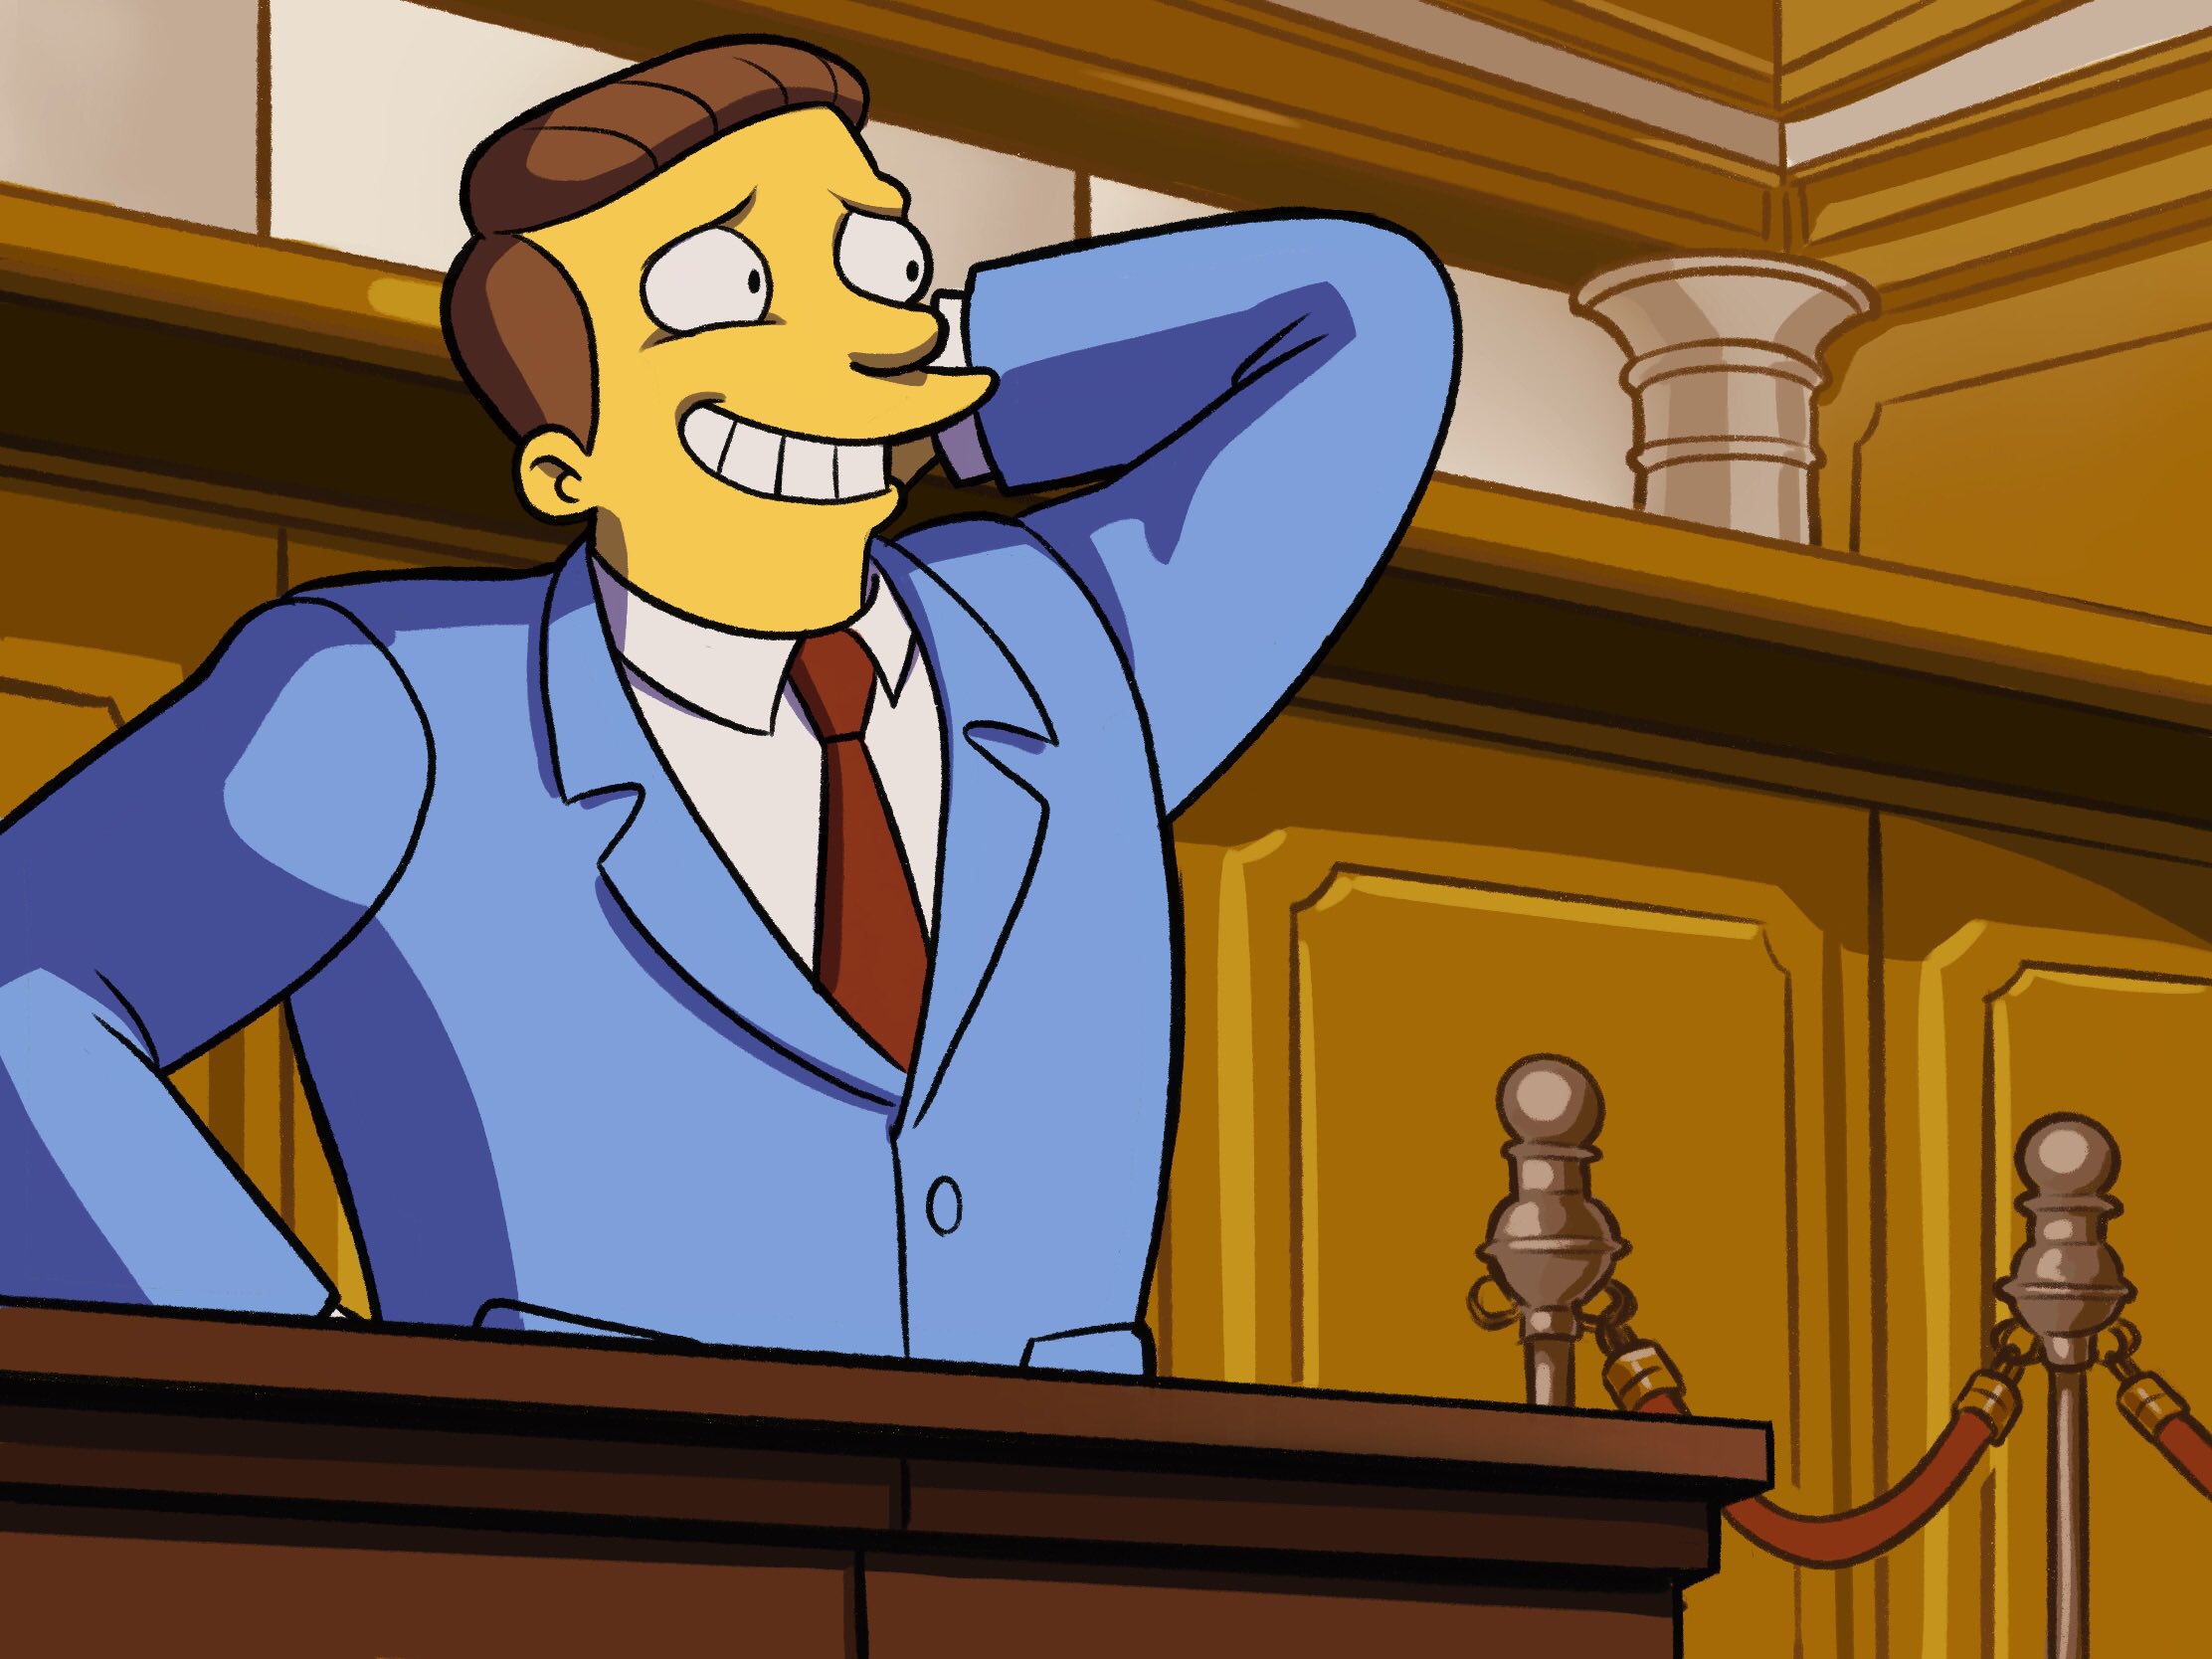 Blue-haired lawyer (Simpsons character) - Simpsons Wiki - wide 4